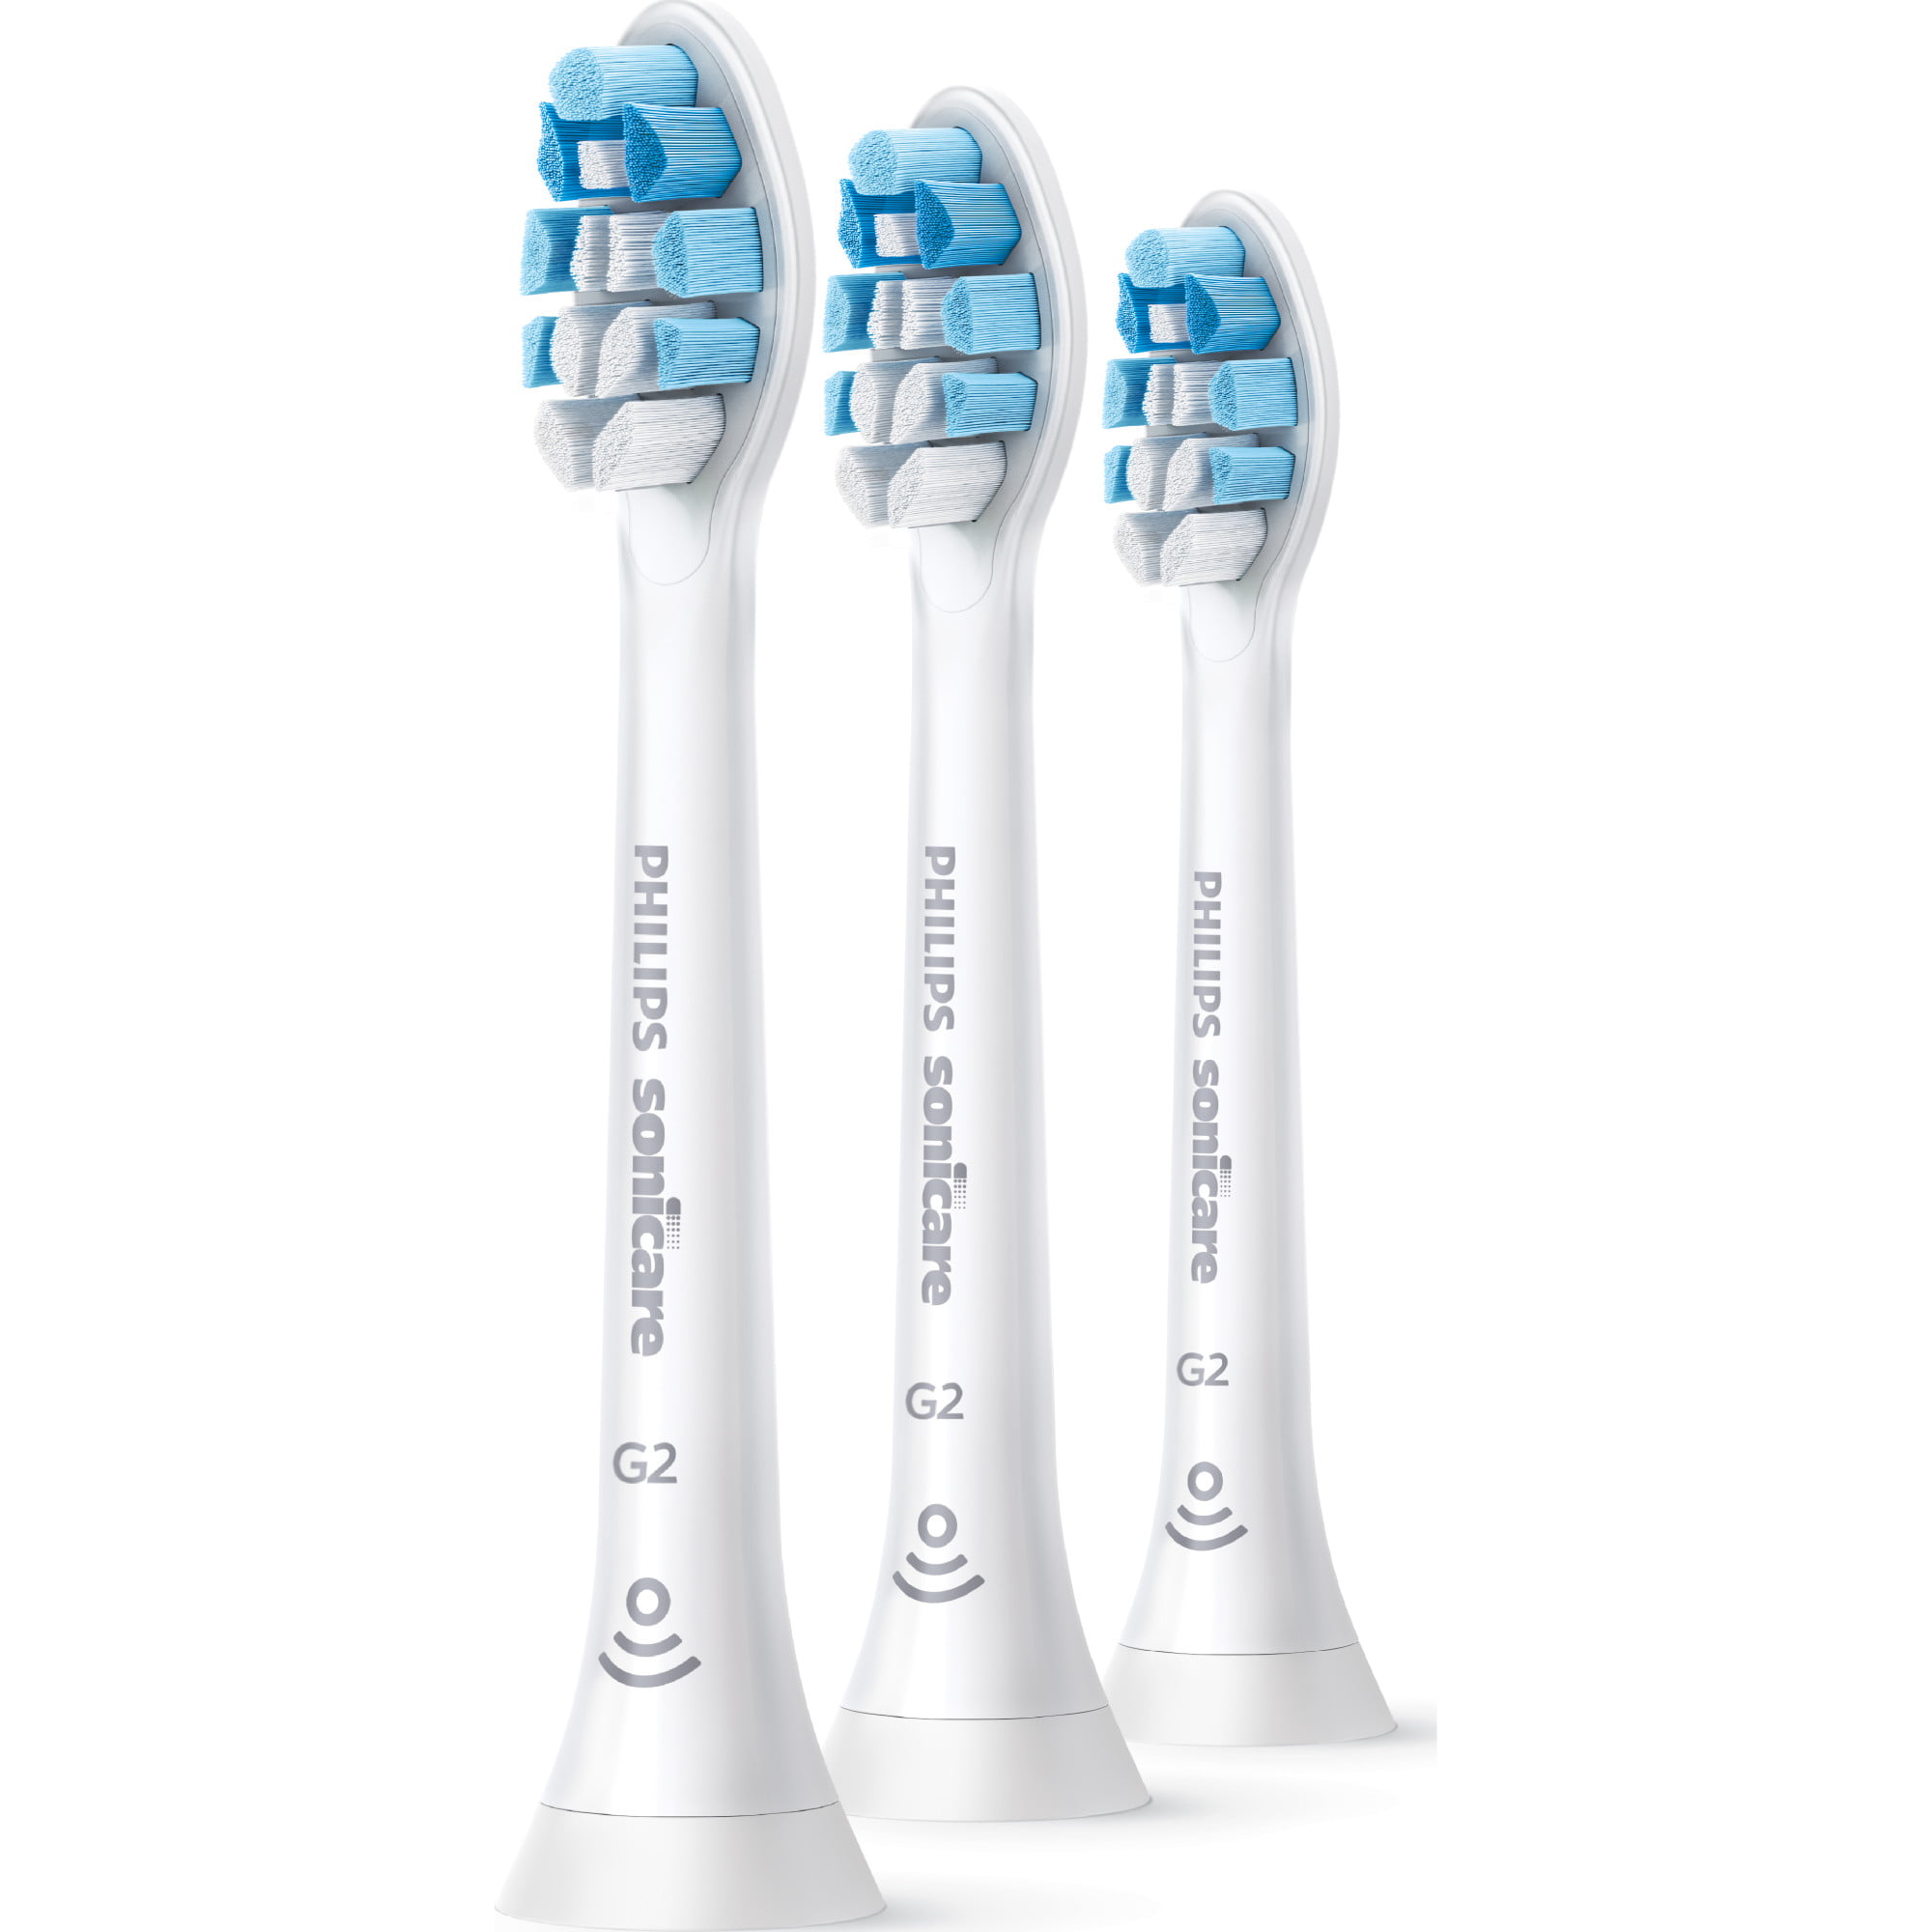 philips-sonicare-optimal-gum-care-replacement-brush-heads-white-3